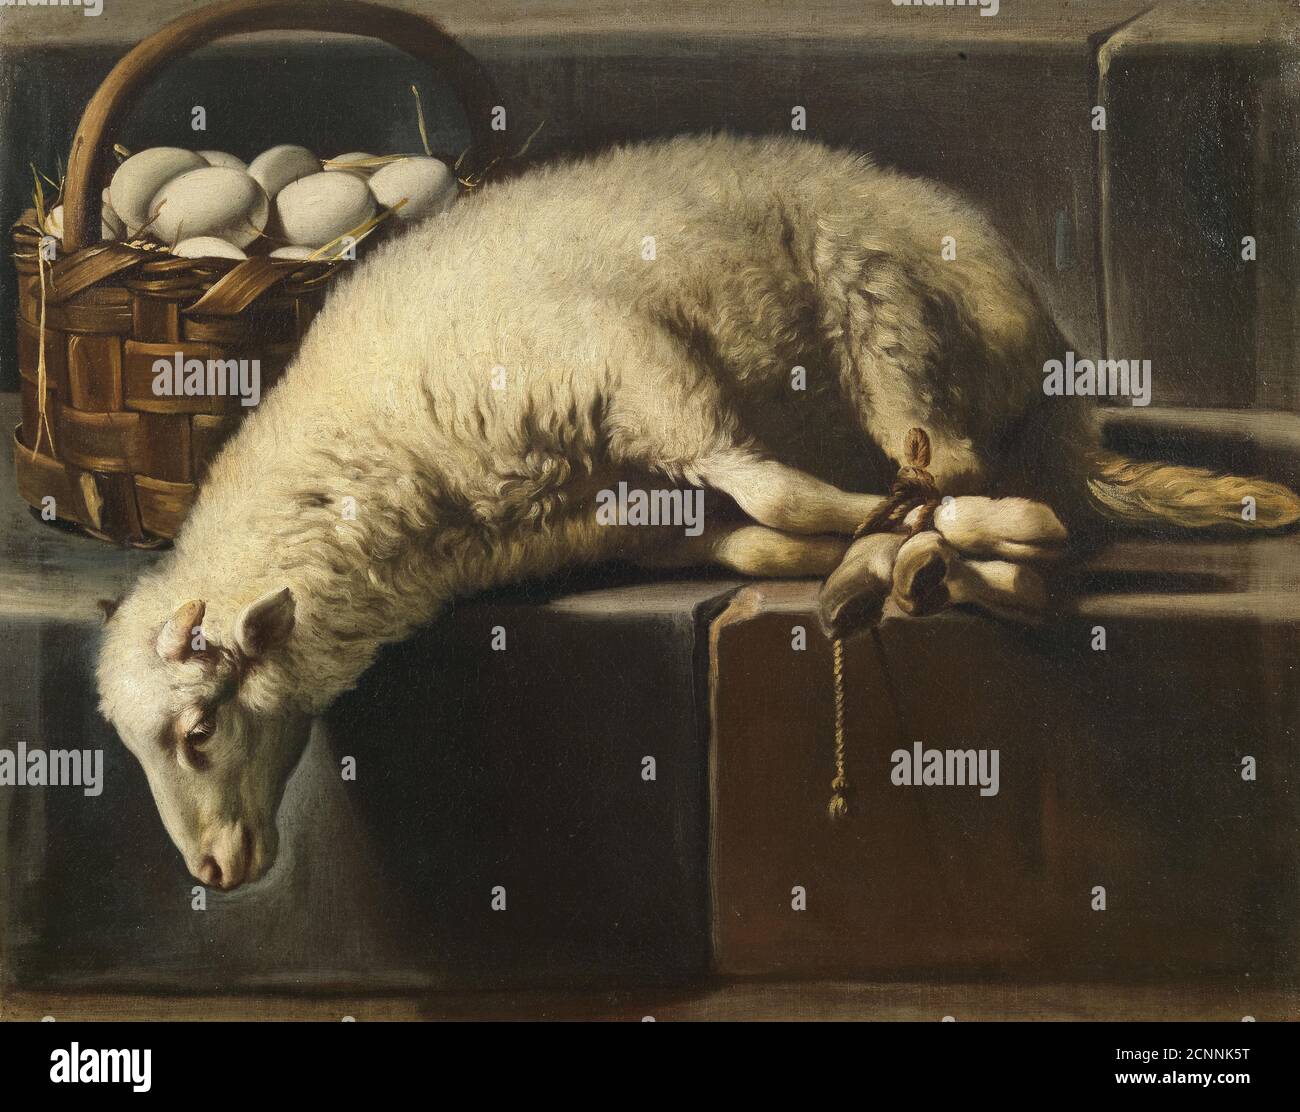 A ligated lamb besides a basket of eggs (Allegory of Easter), Second Half of the 17th cen.. Private Collection. Stock Photo